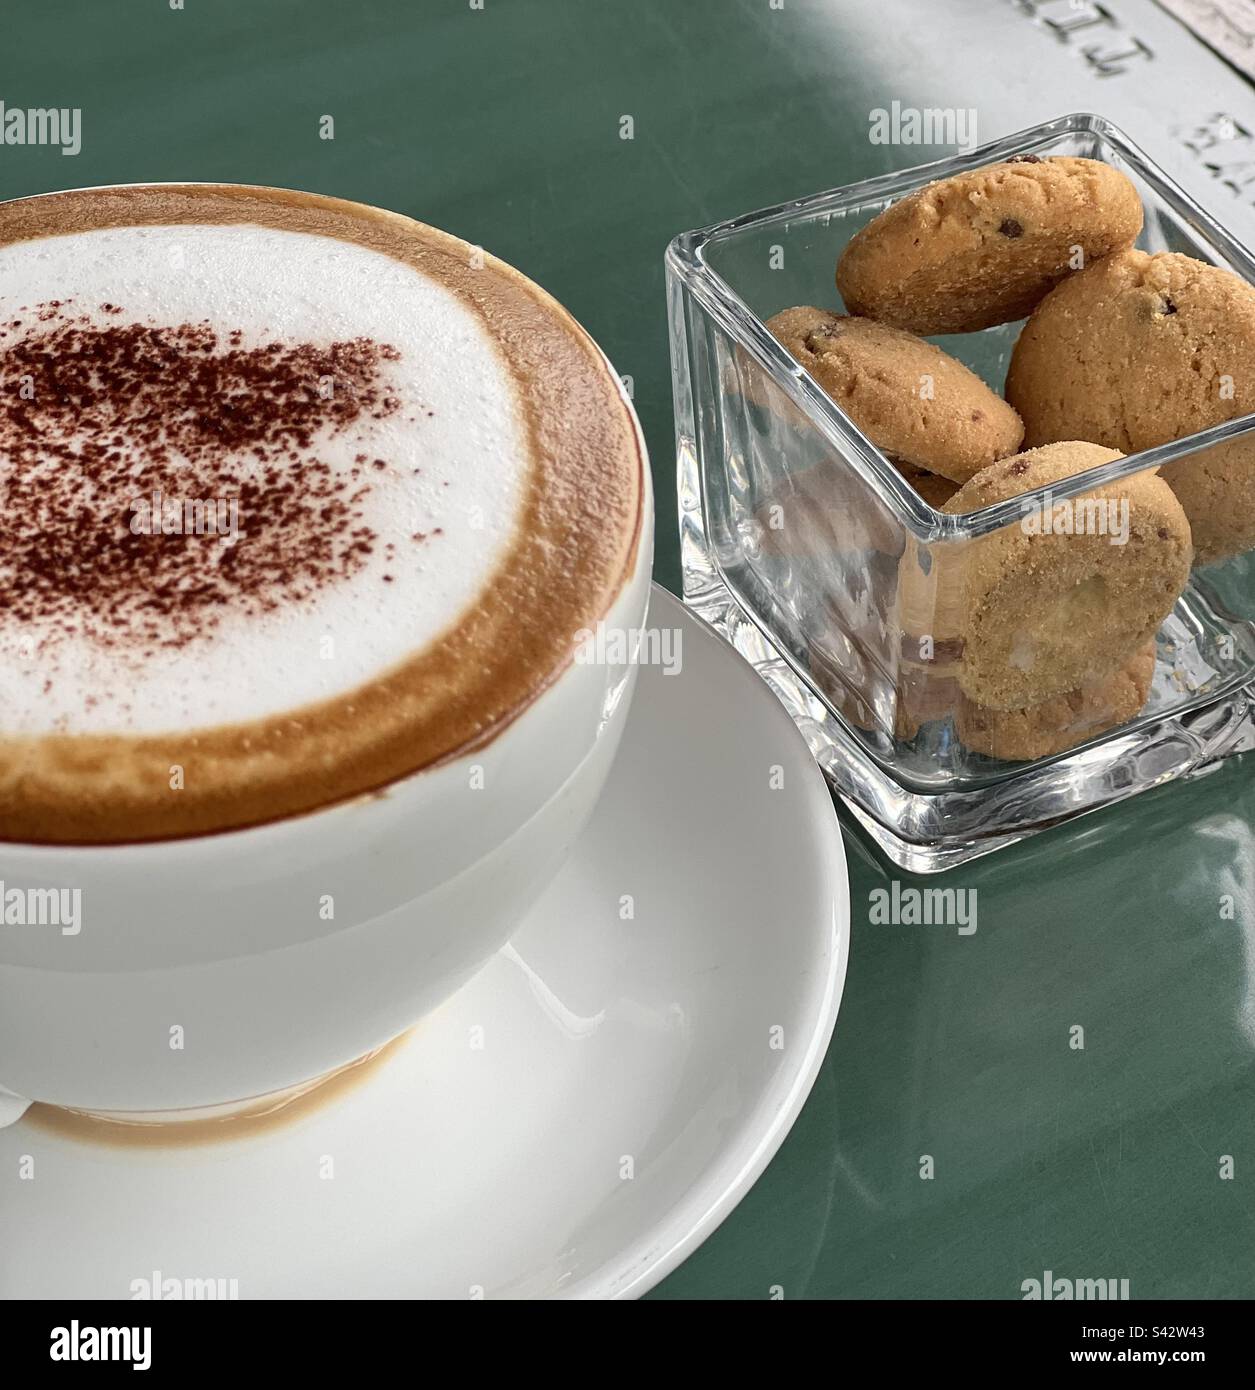 Good things start with letter “C”: Coffee, Cookies… Stock Photo